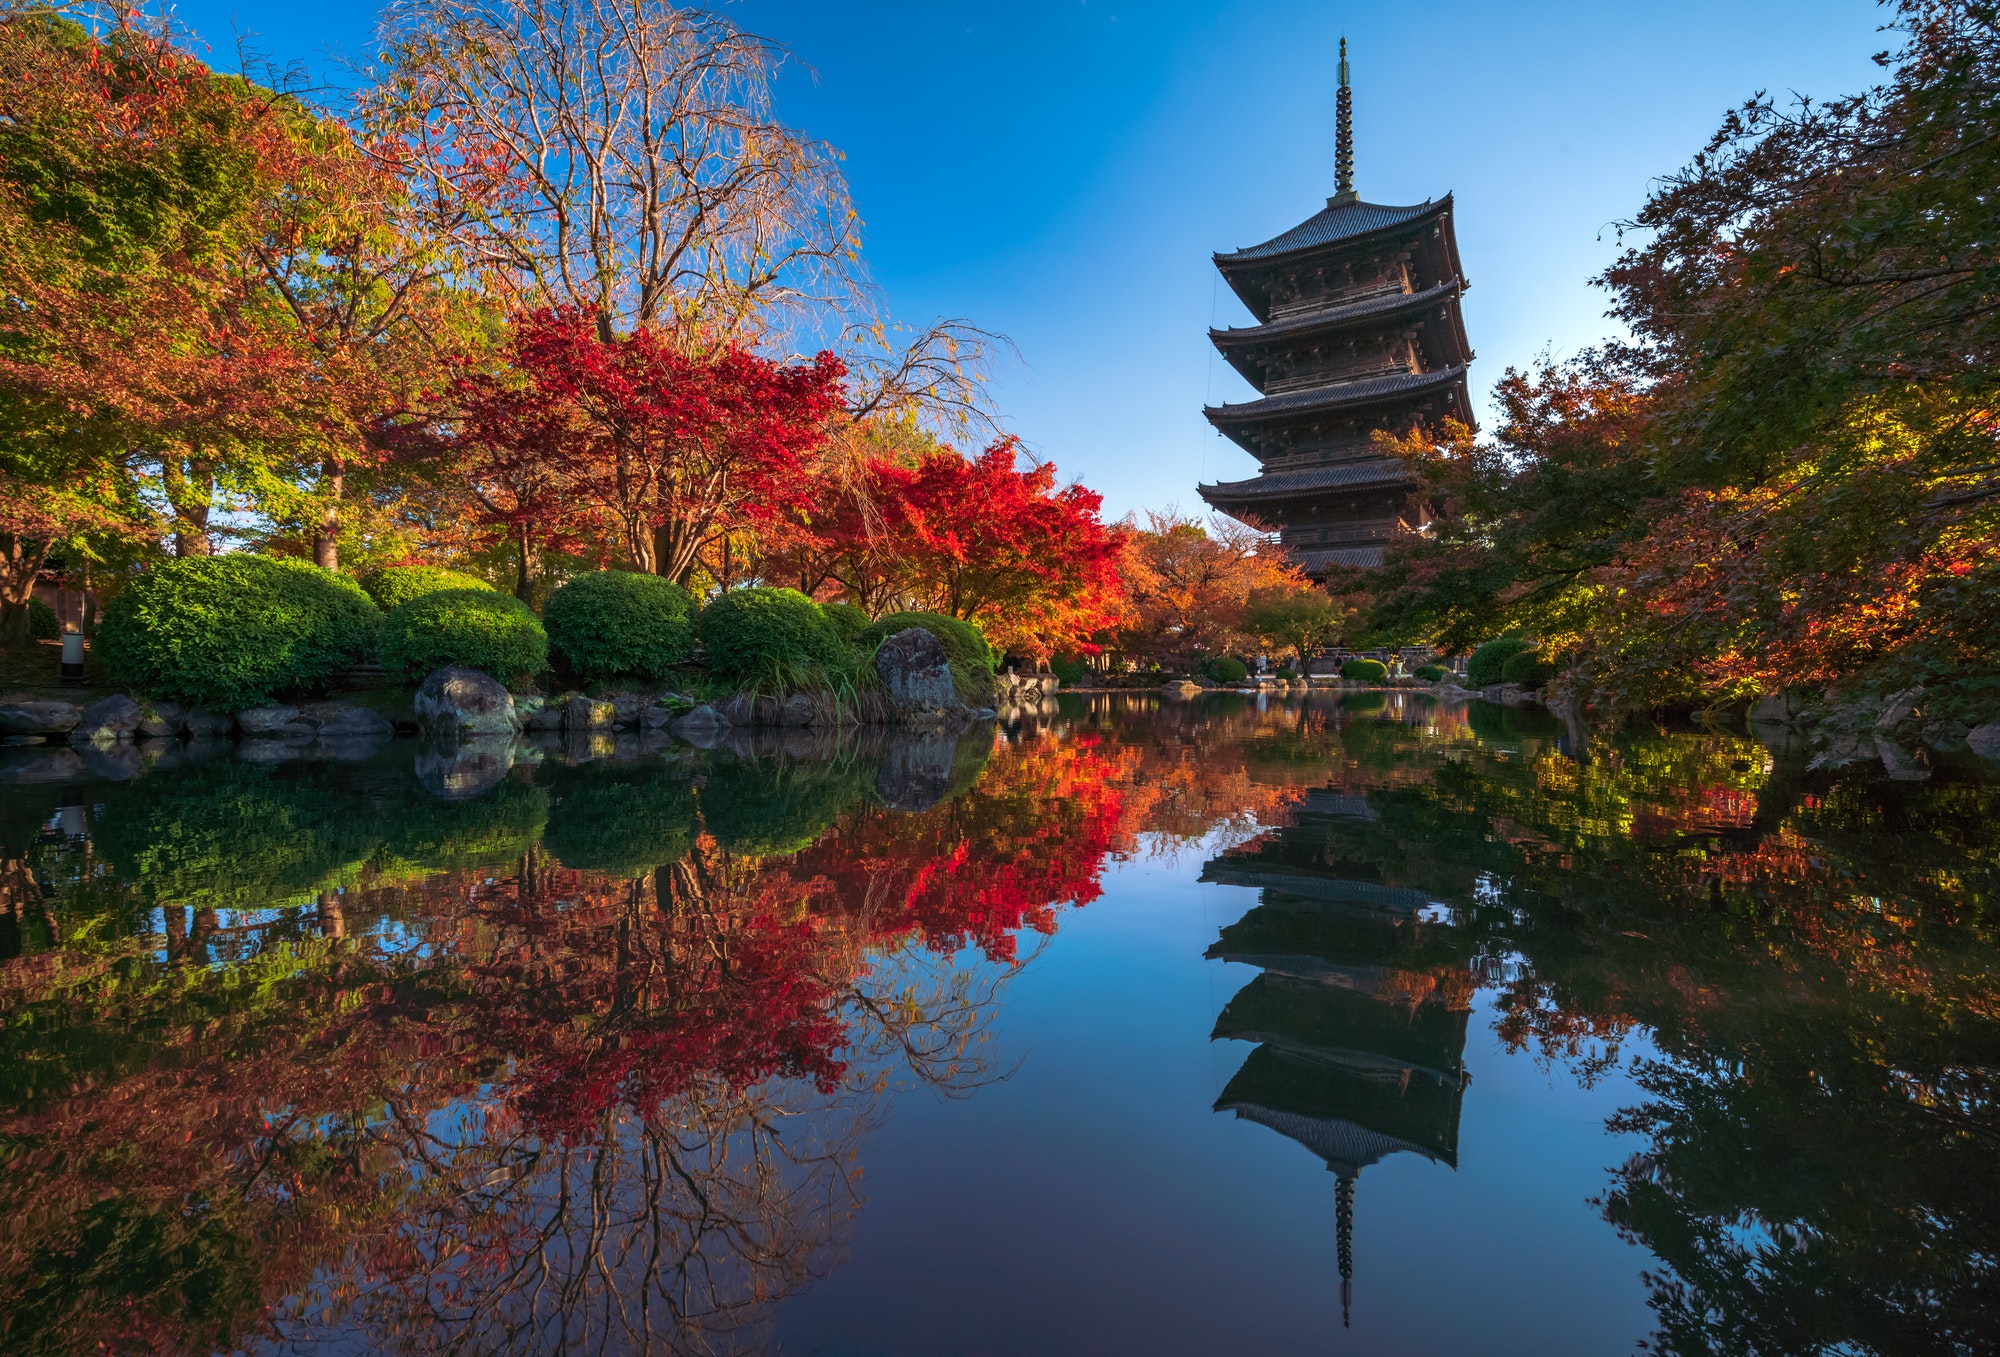 The wooden pagoda of Toji Temple with beautiful maple leaves, Kyoto, Japan